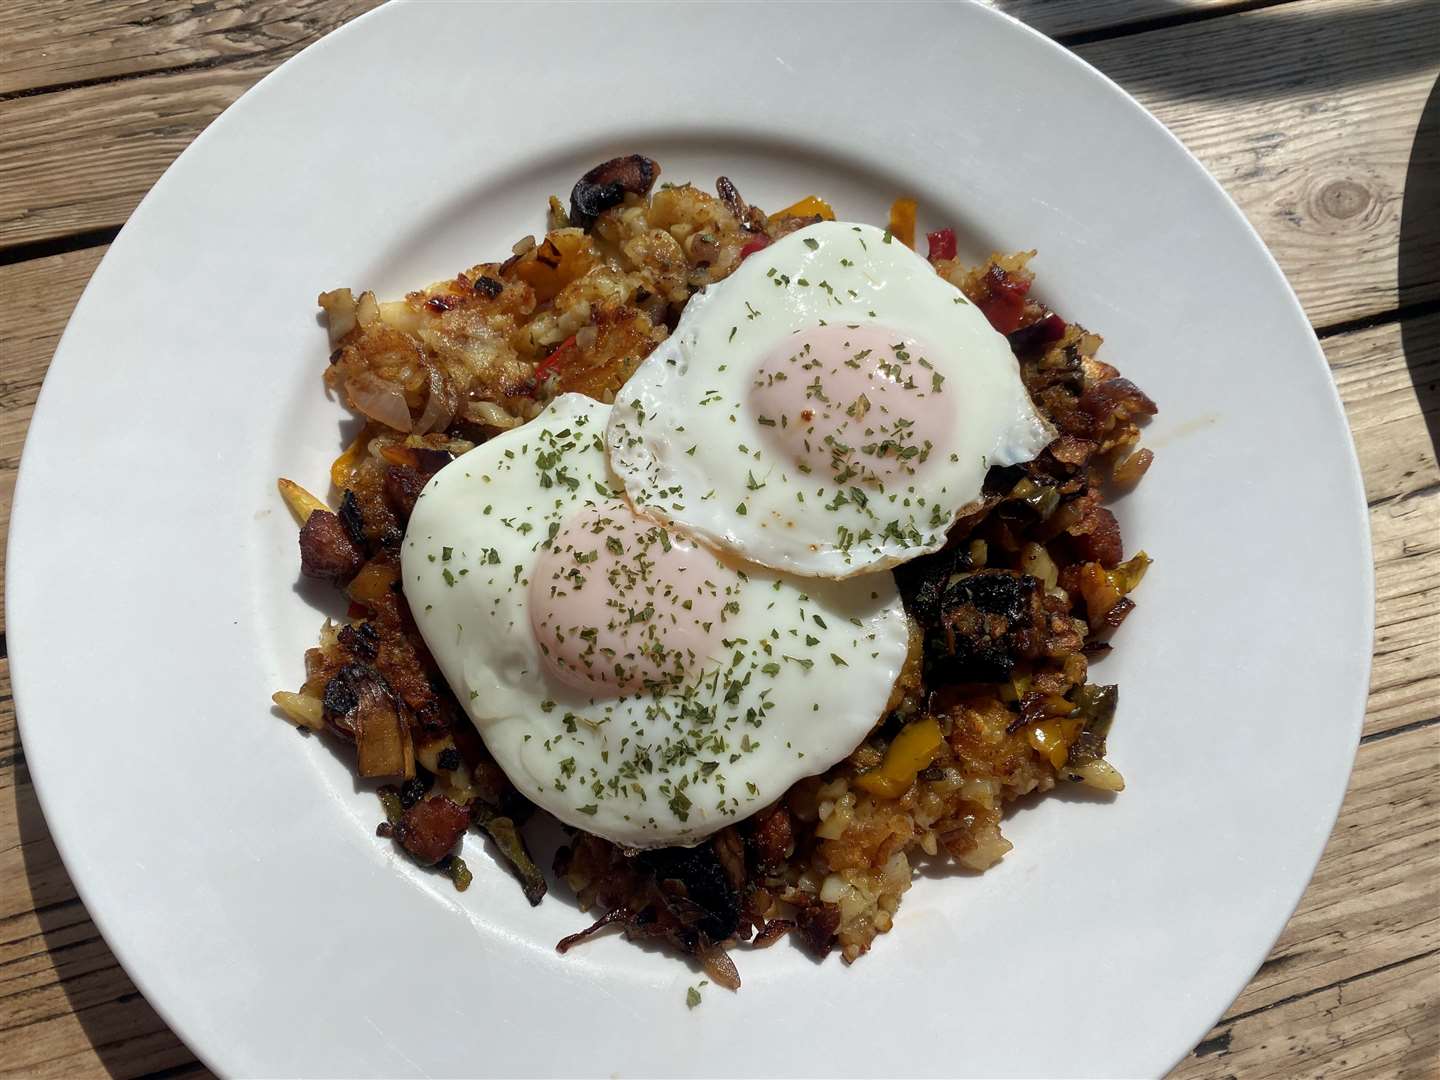 The Spanish hash with chorizo came out promptly but lacked the kick desired